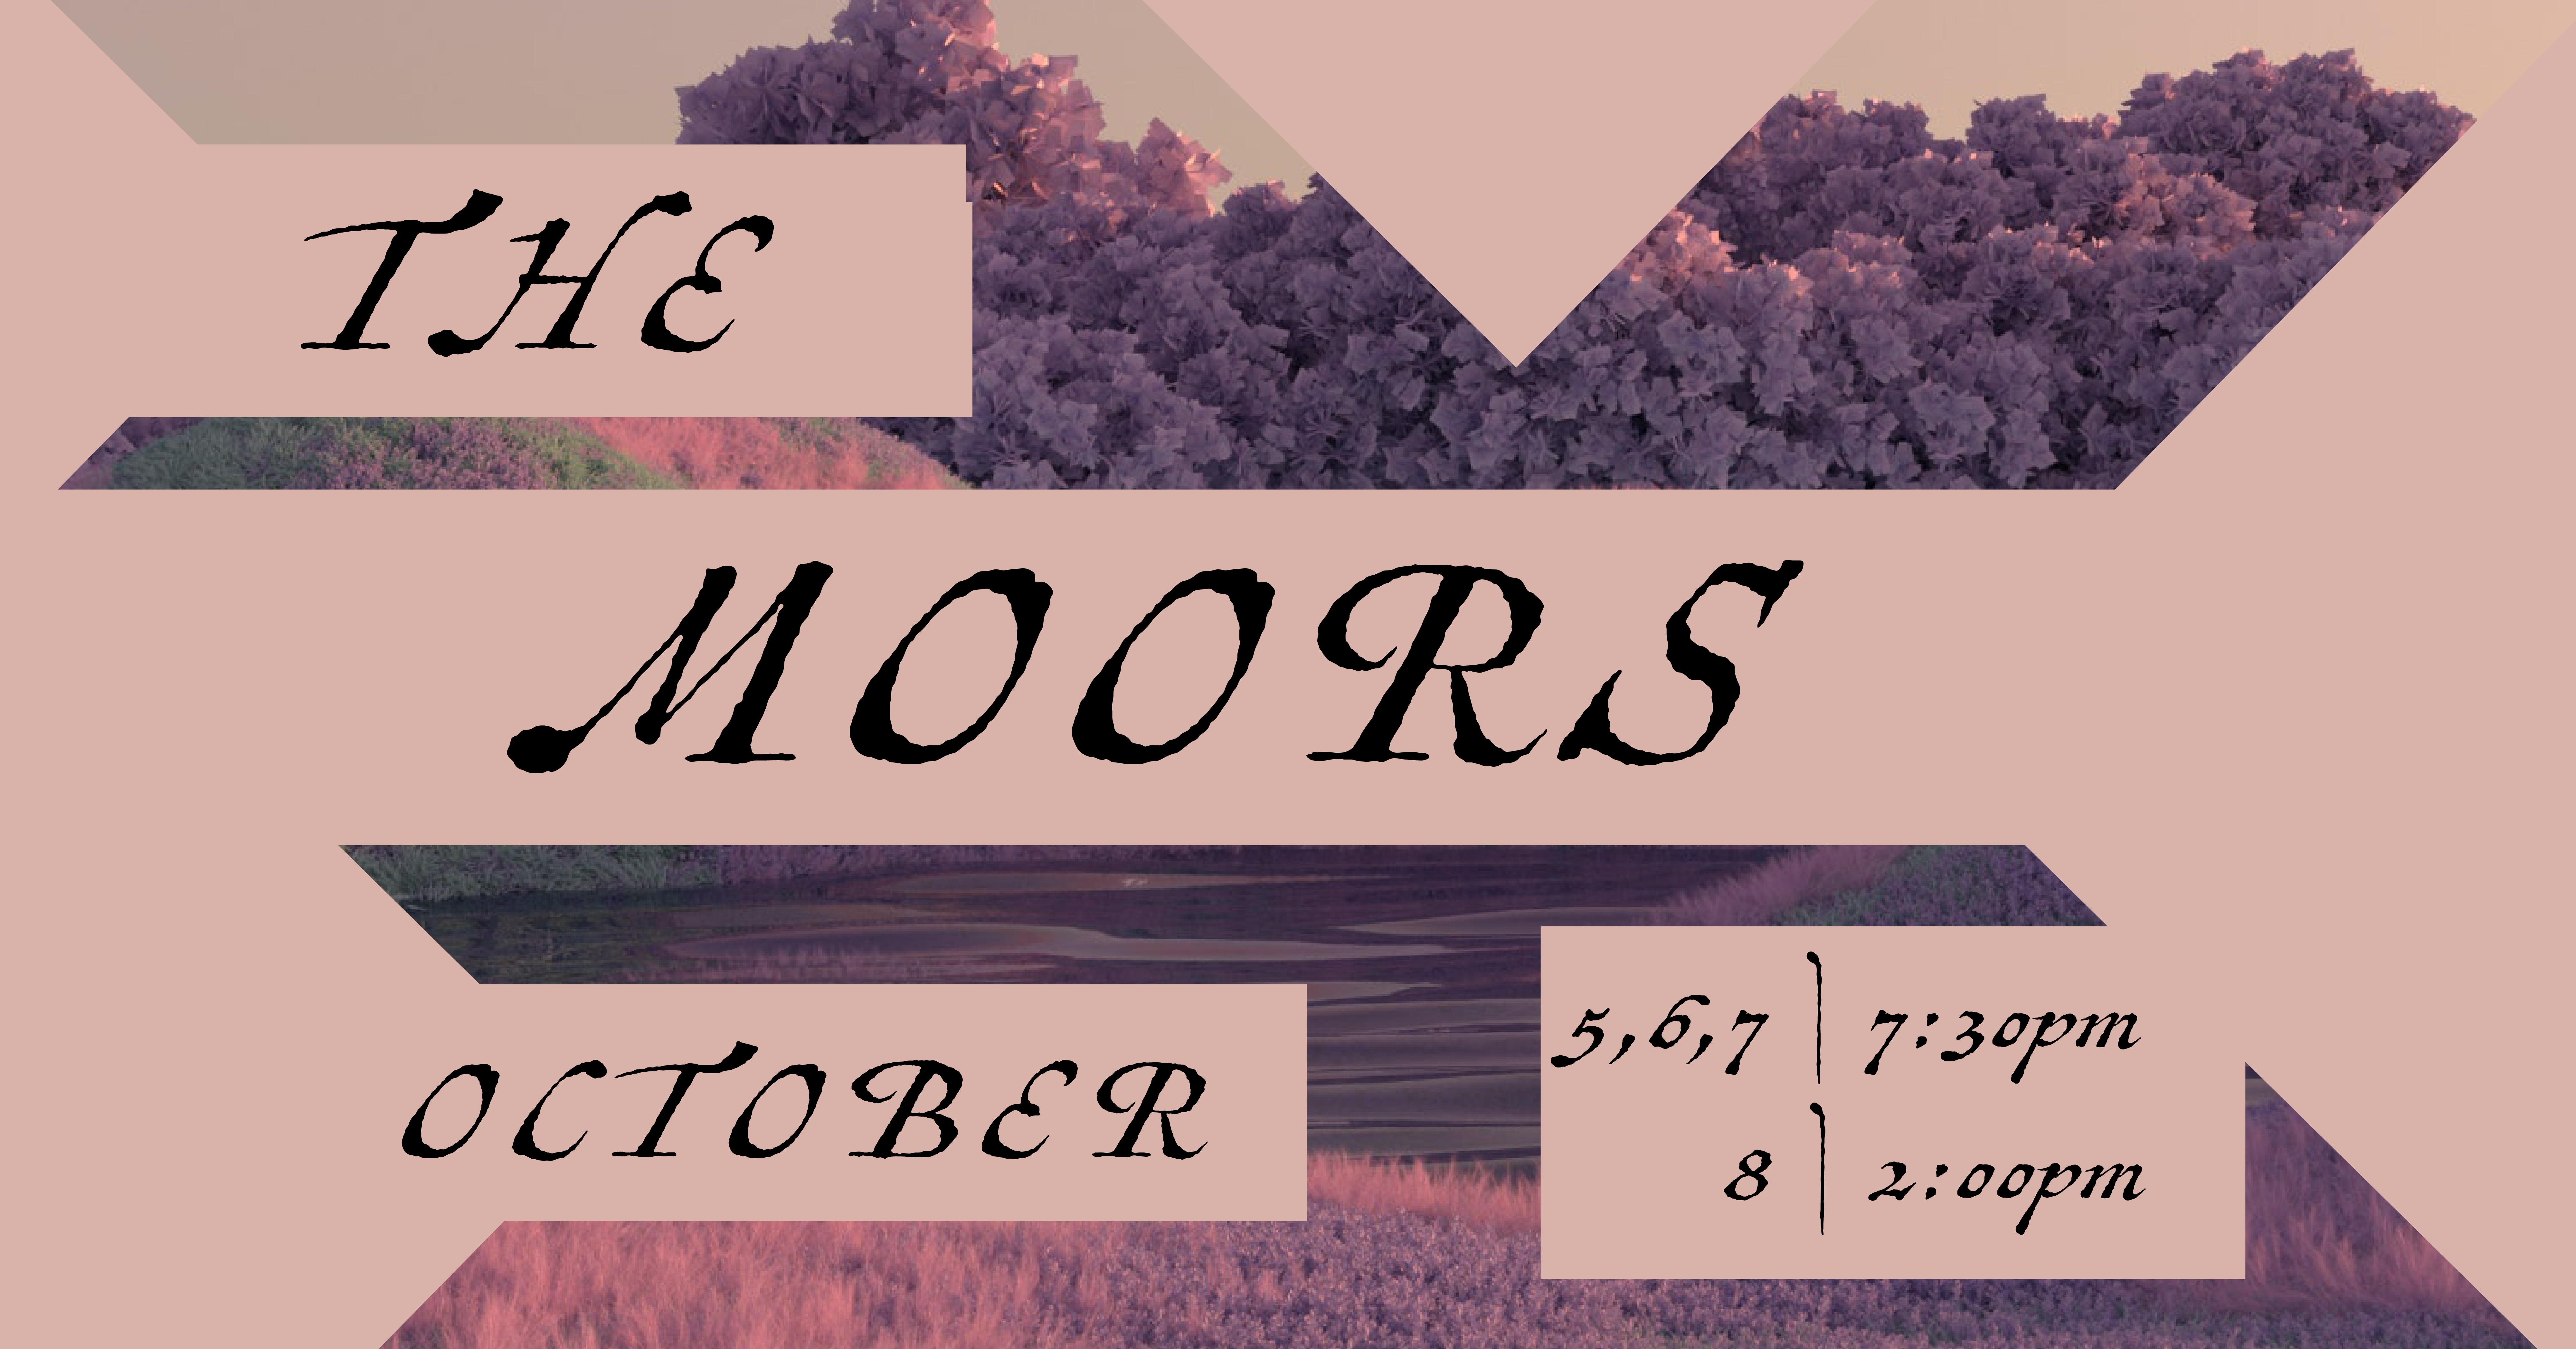 Poster of a pastoral season with mauve cut-outs that say "The Moors, October 5,6,7 at 7:30pm and October 8 at 2:00pm."